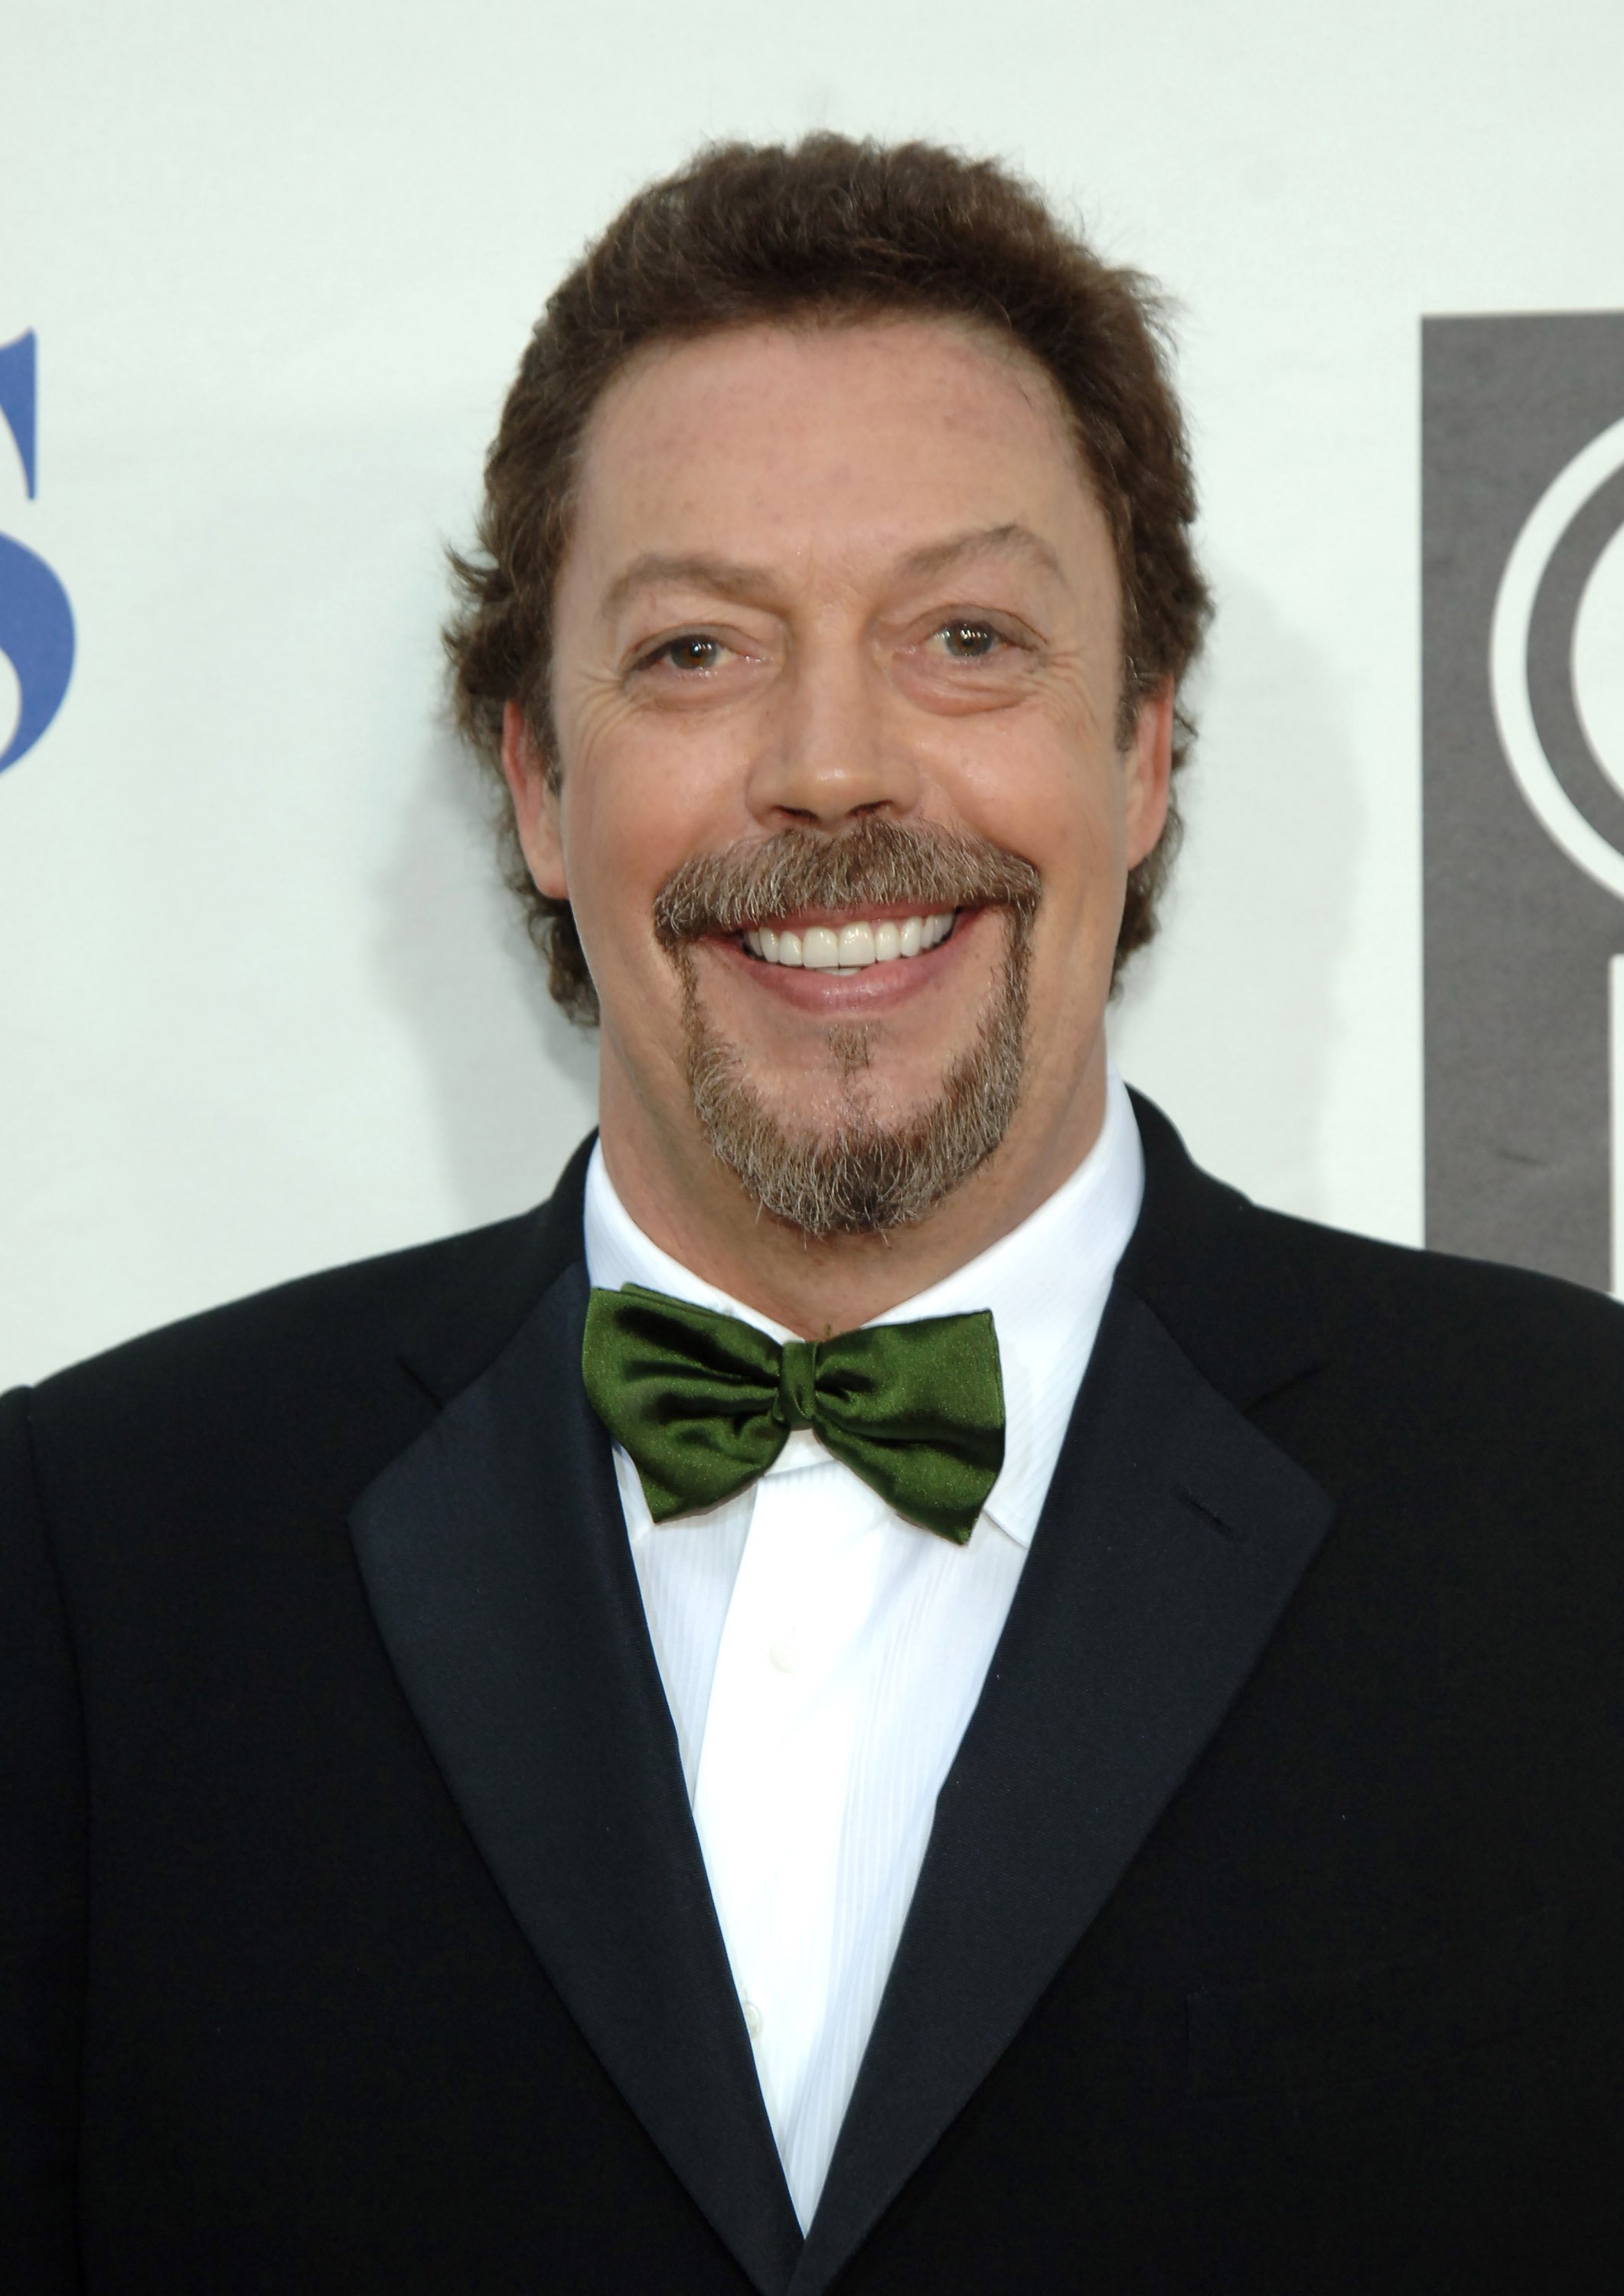 Tim Curry, 2005 | Source: Getty Images